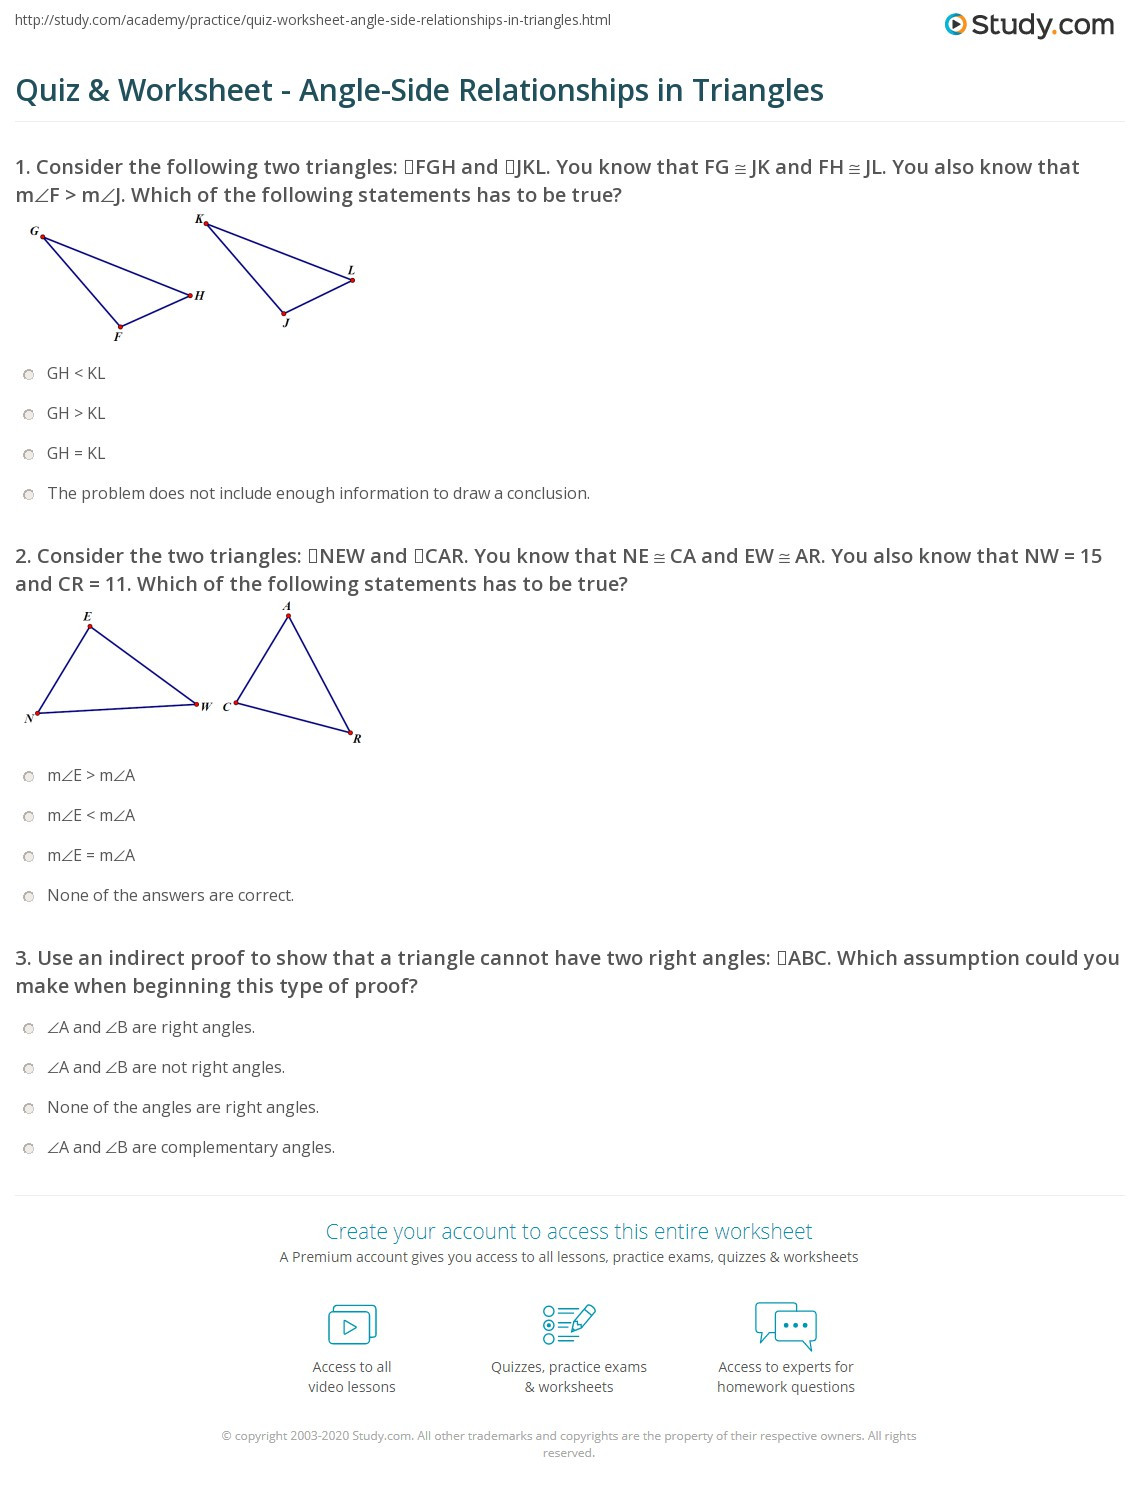 Triangle Inequality theorem Worksheet Quiz &amp; Worksheet Angle Side Relationships In Triangles